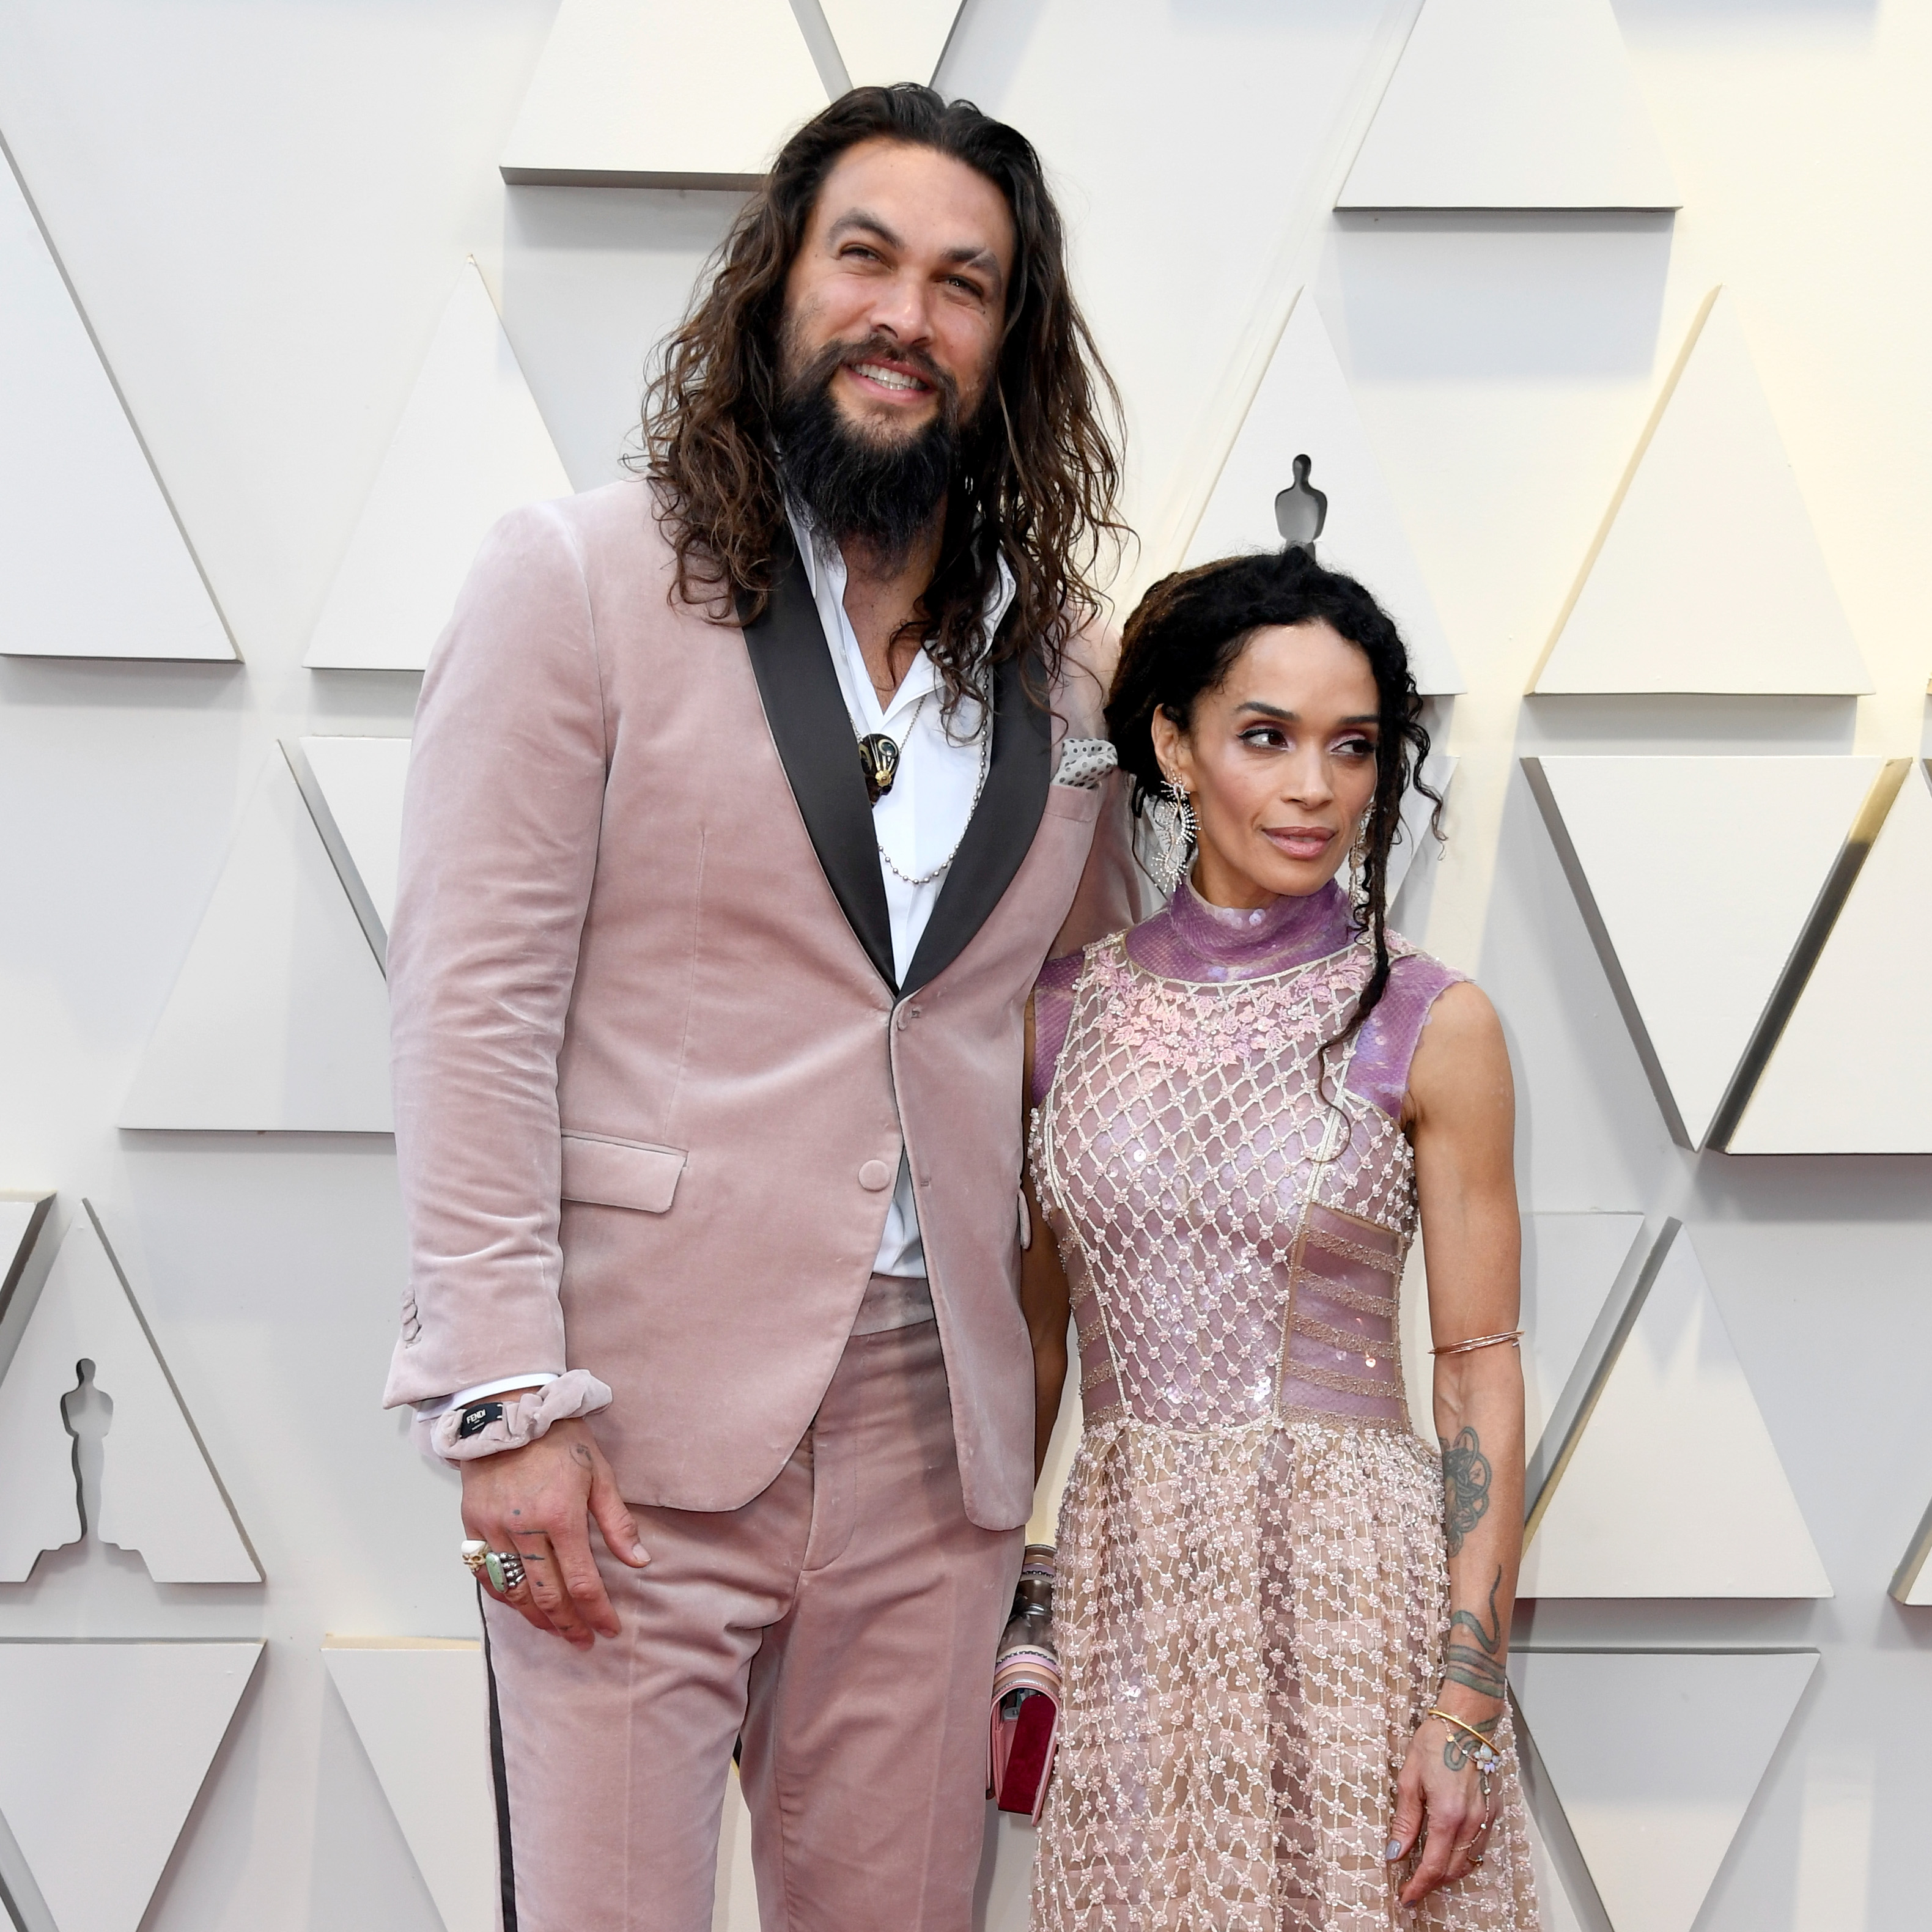 Jason Momoa and Lisa Bonet in February 2019 in Hollywood, California | Source: Getty Images